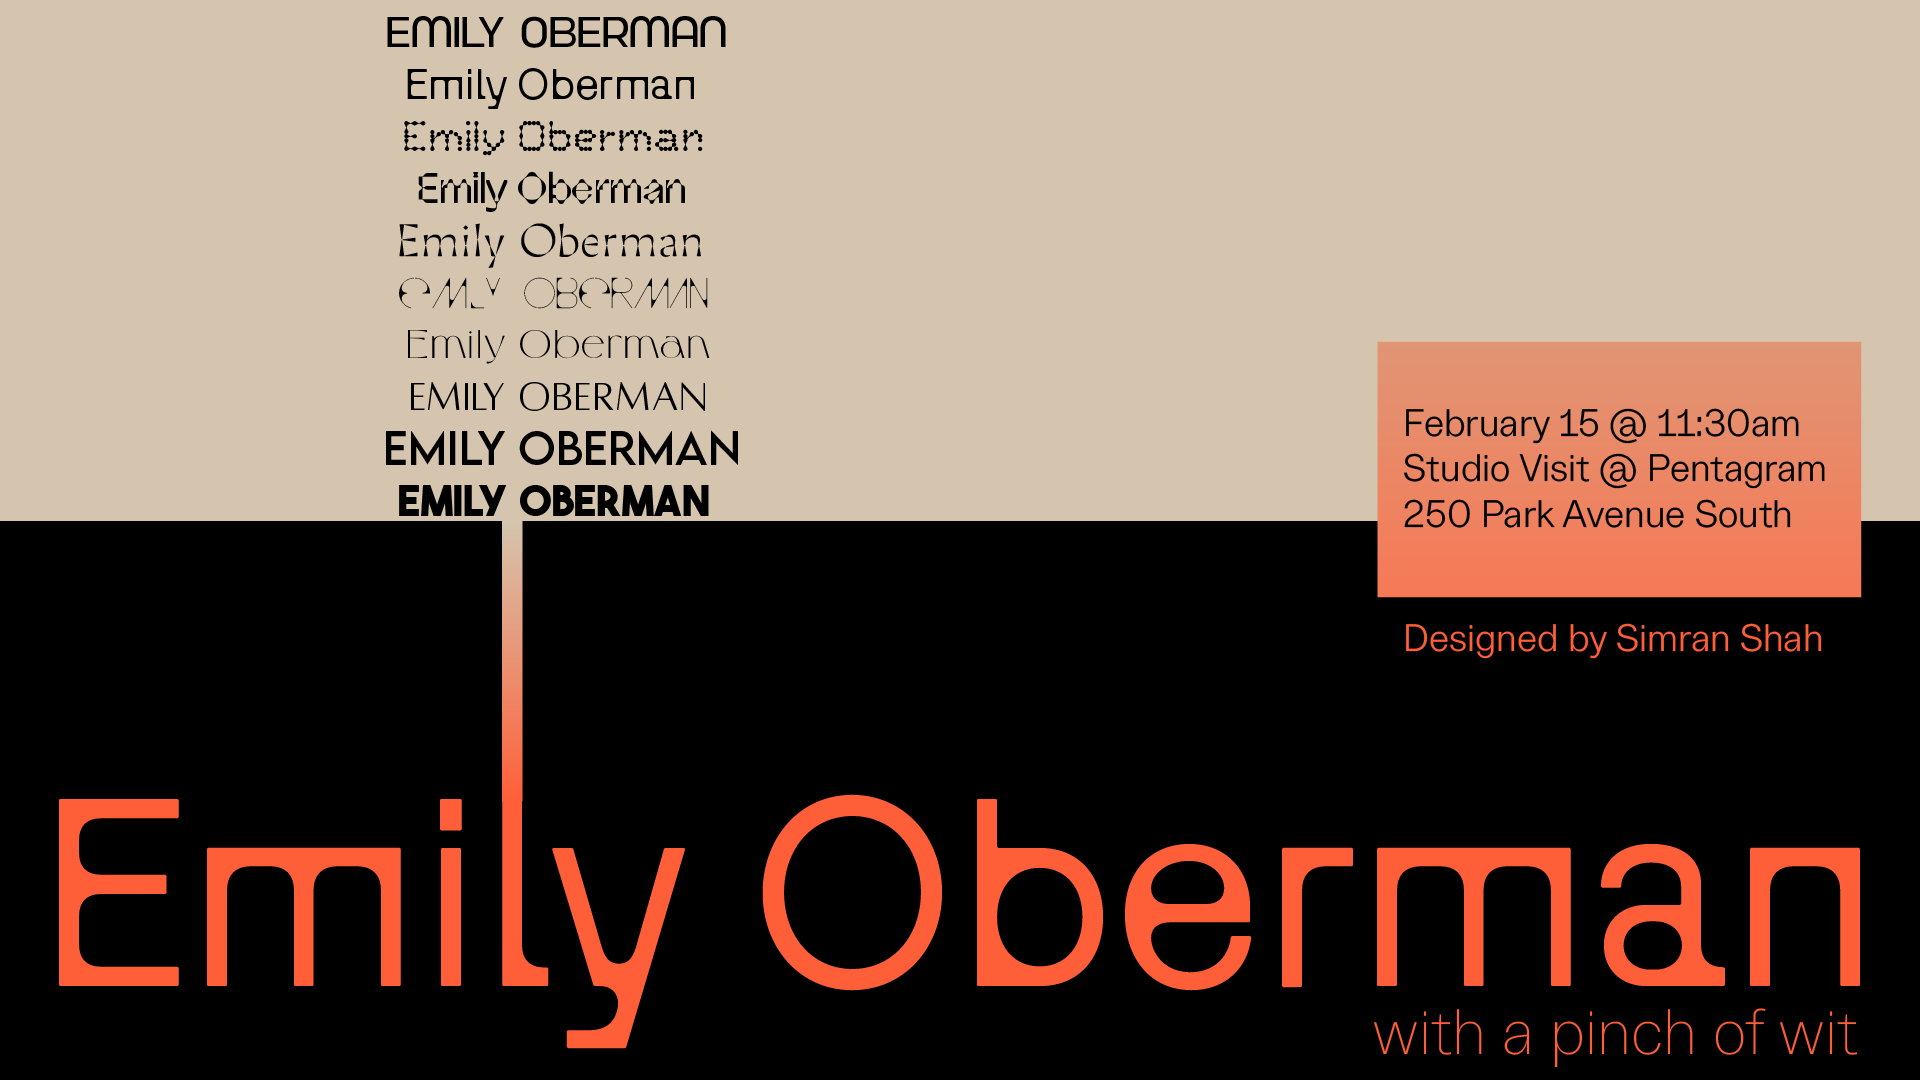 a poster announcing a studio visit to Pentagram with Emily Oberman